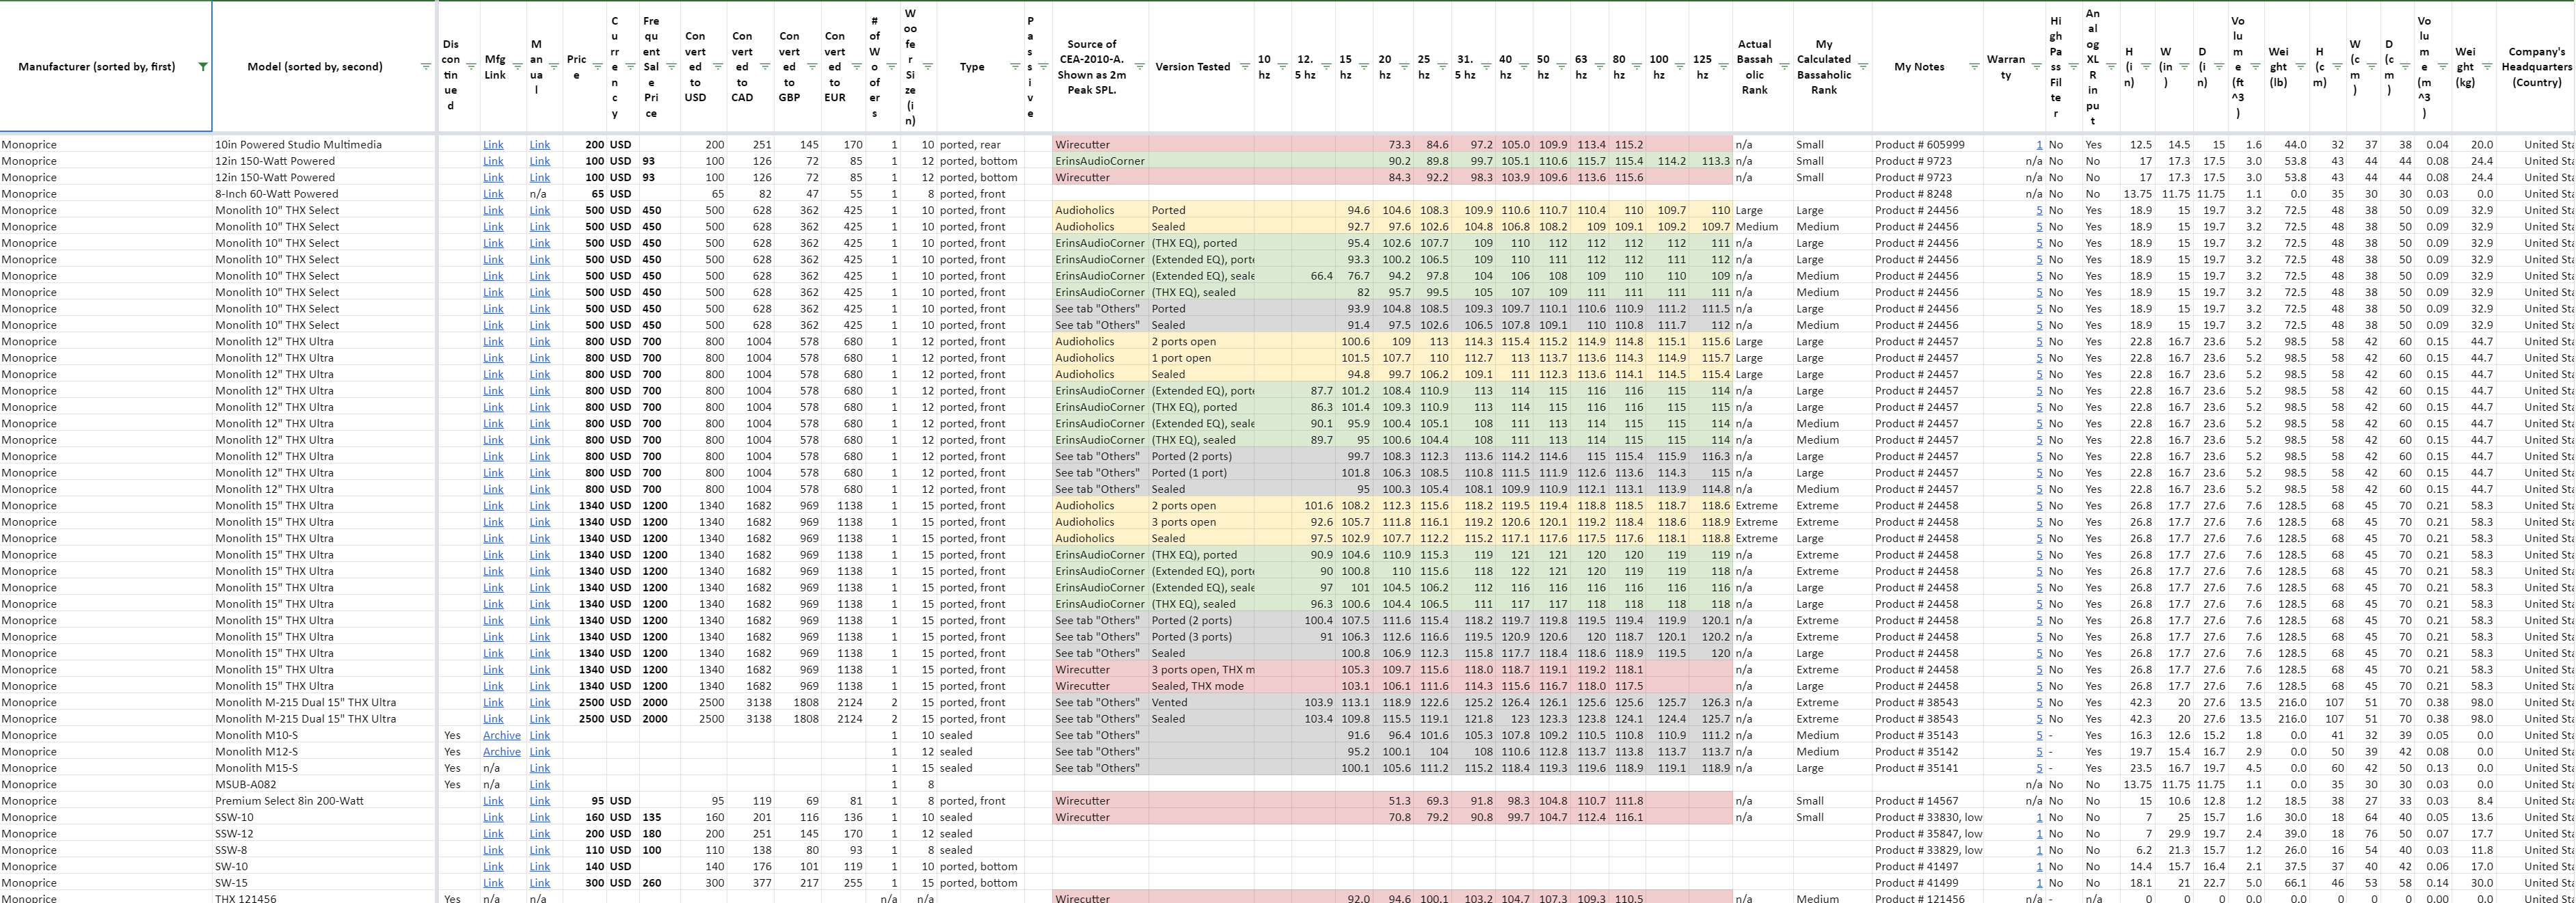 2021-04-01 13_27_15-Subwoofer Comparison (by @sweetchaos) - Google Sheets.png